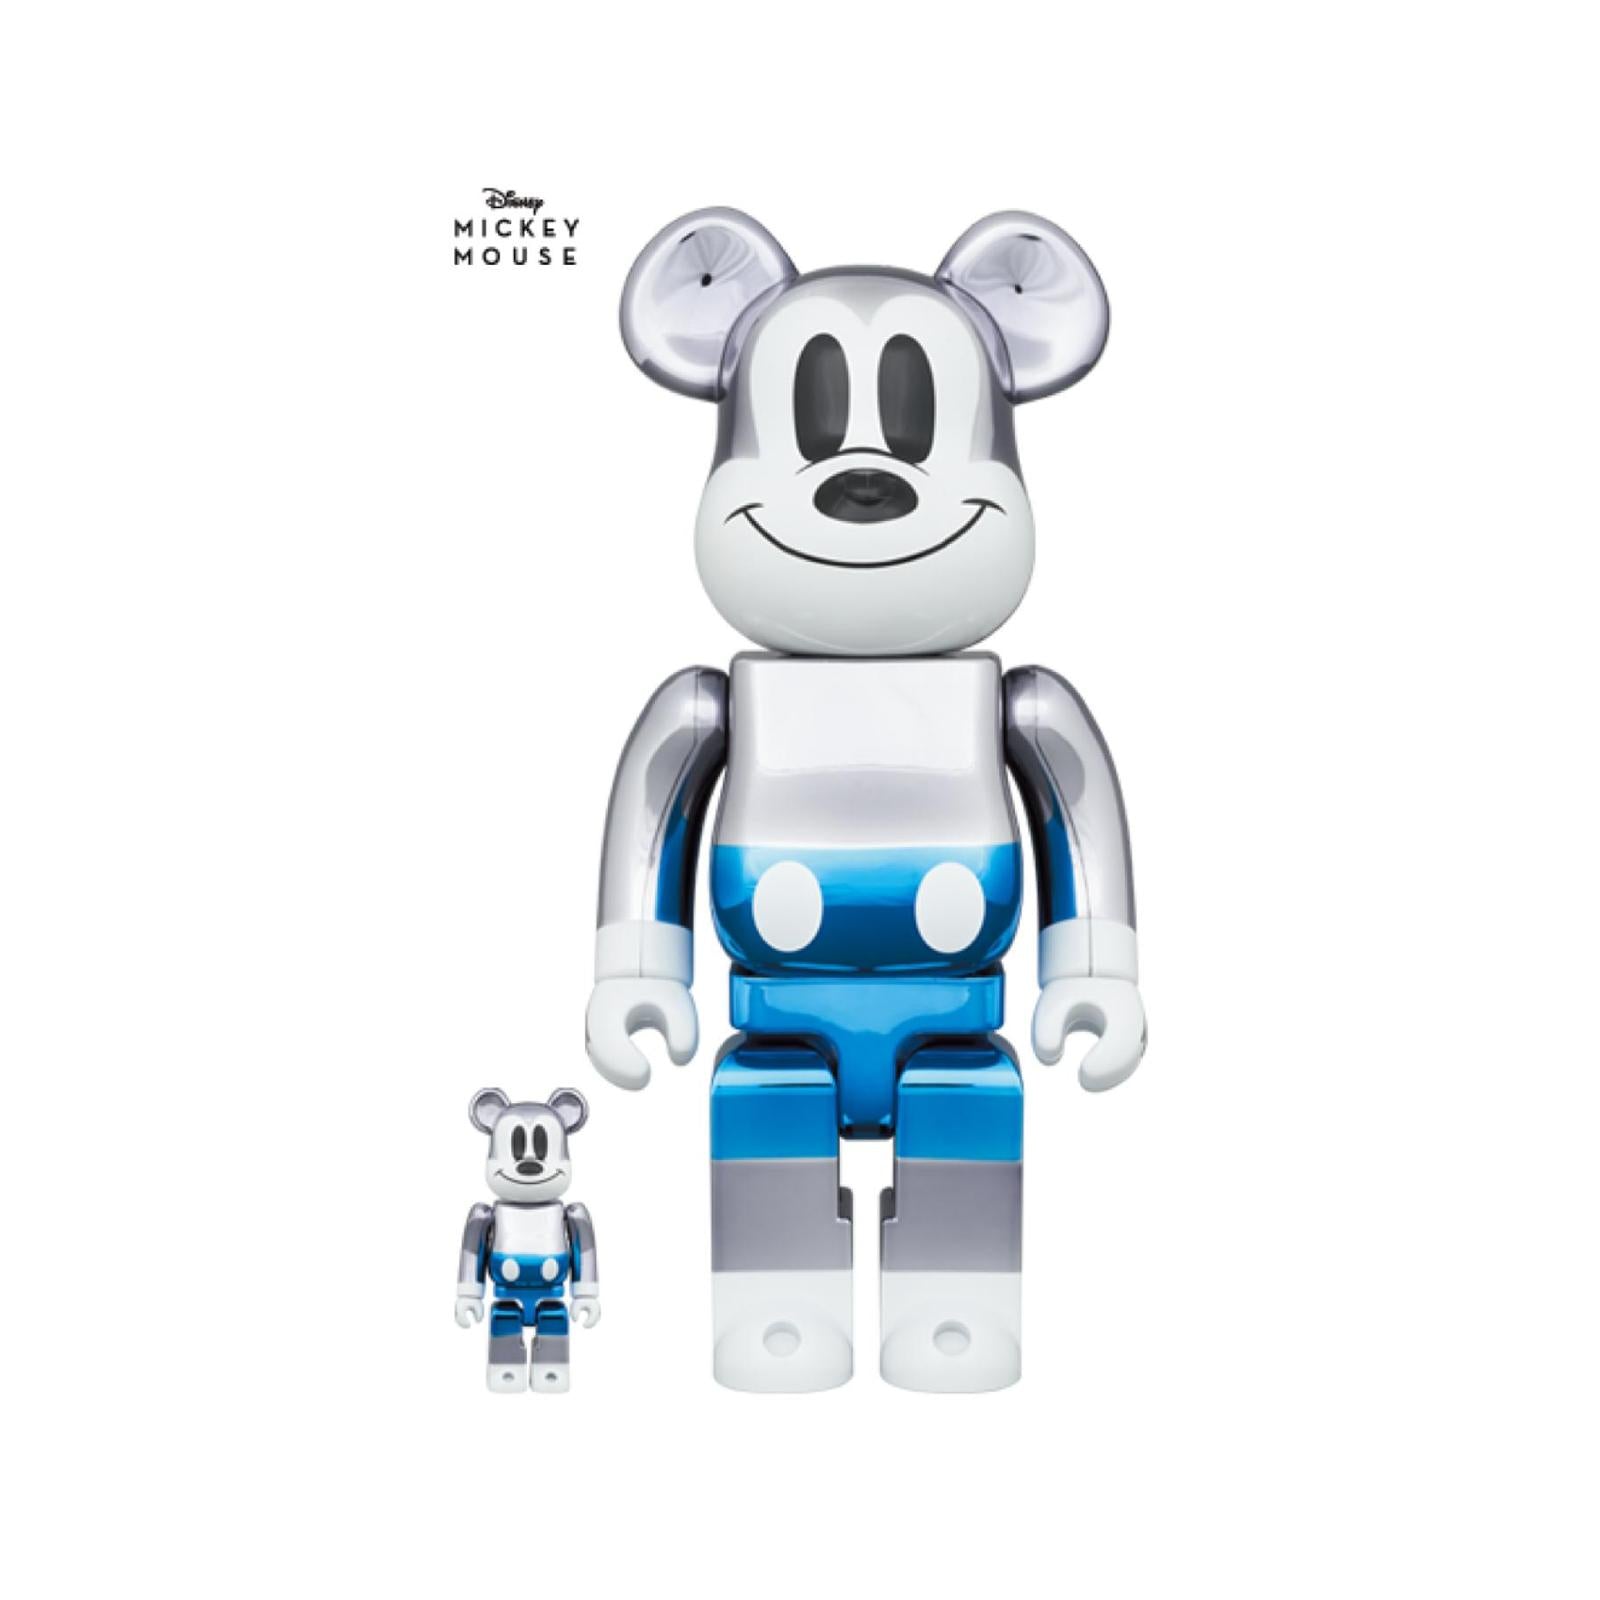 100％ & 400% BE@RBRICK fragmentdesign MICKEY MOUSE BLUE Ver ...